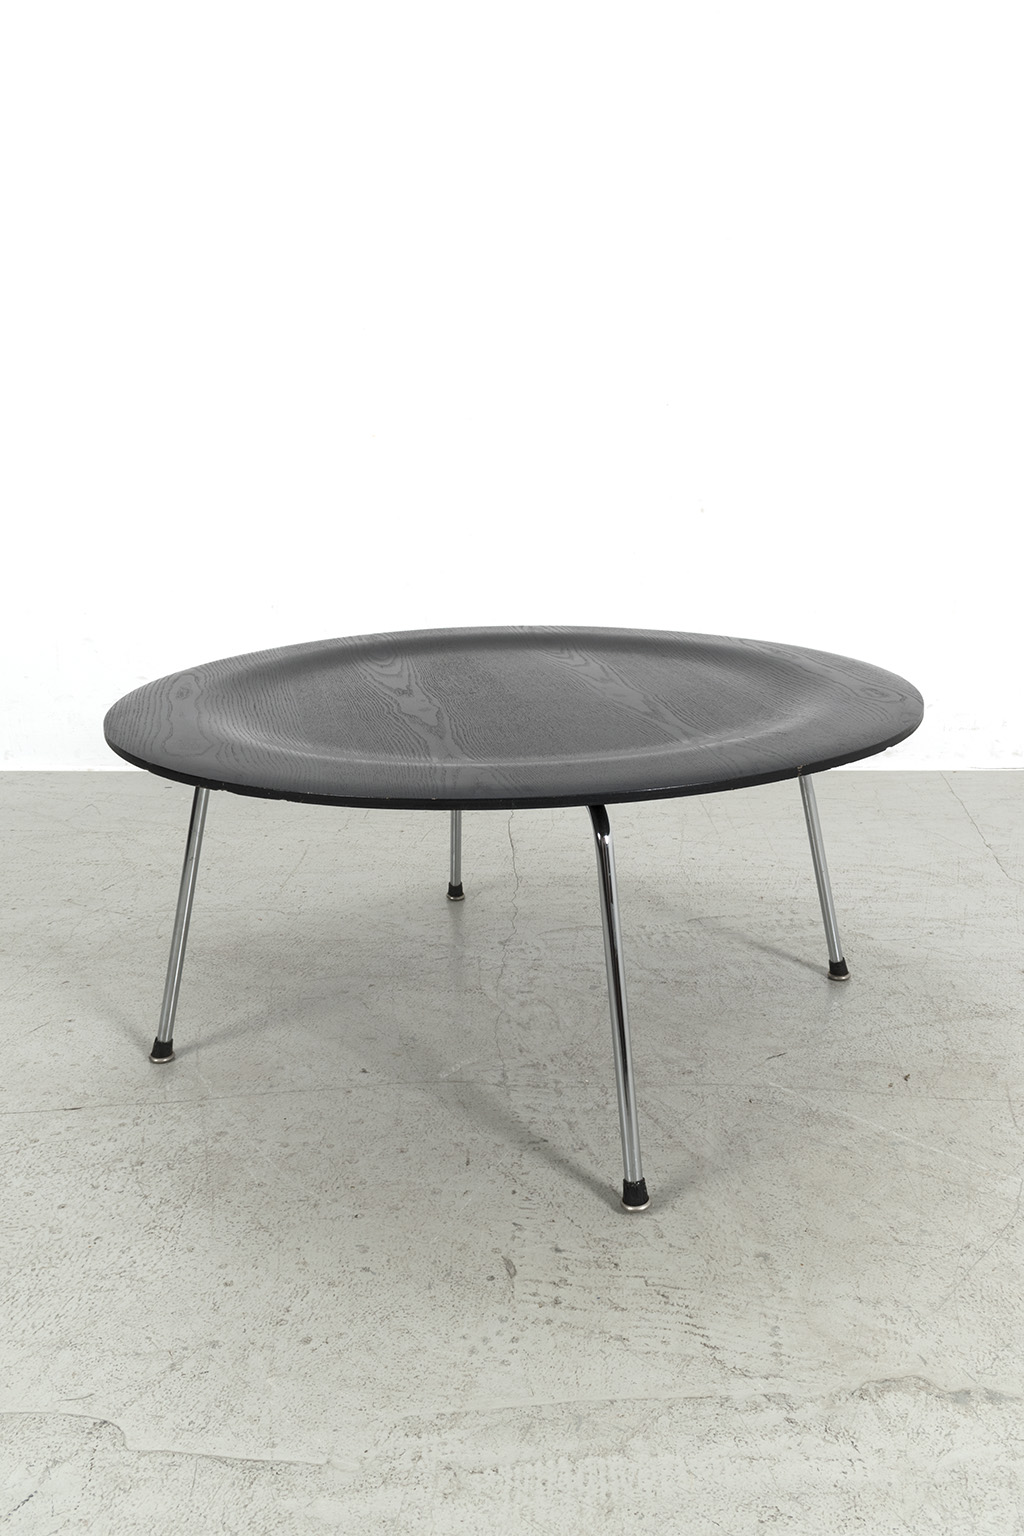 Charles & Ray Eames coffee table